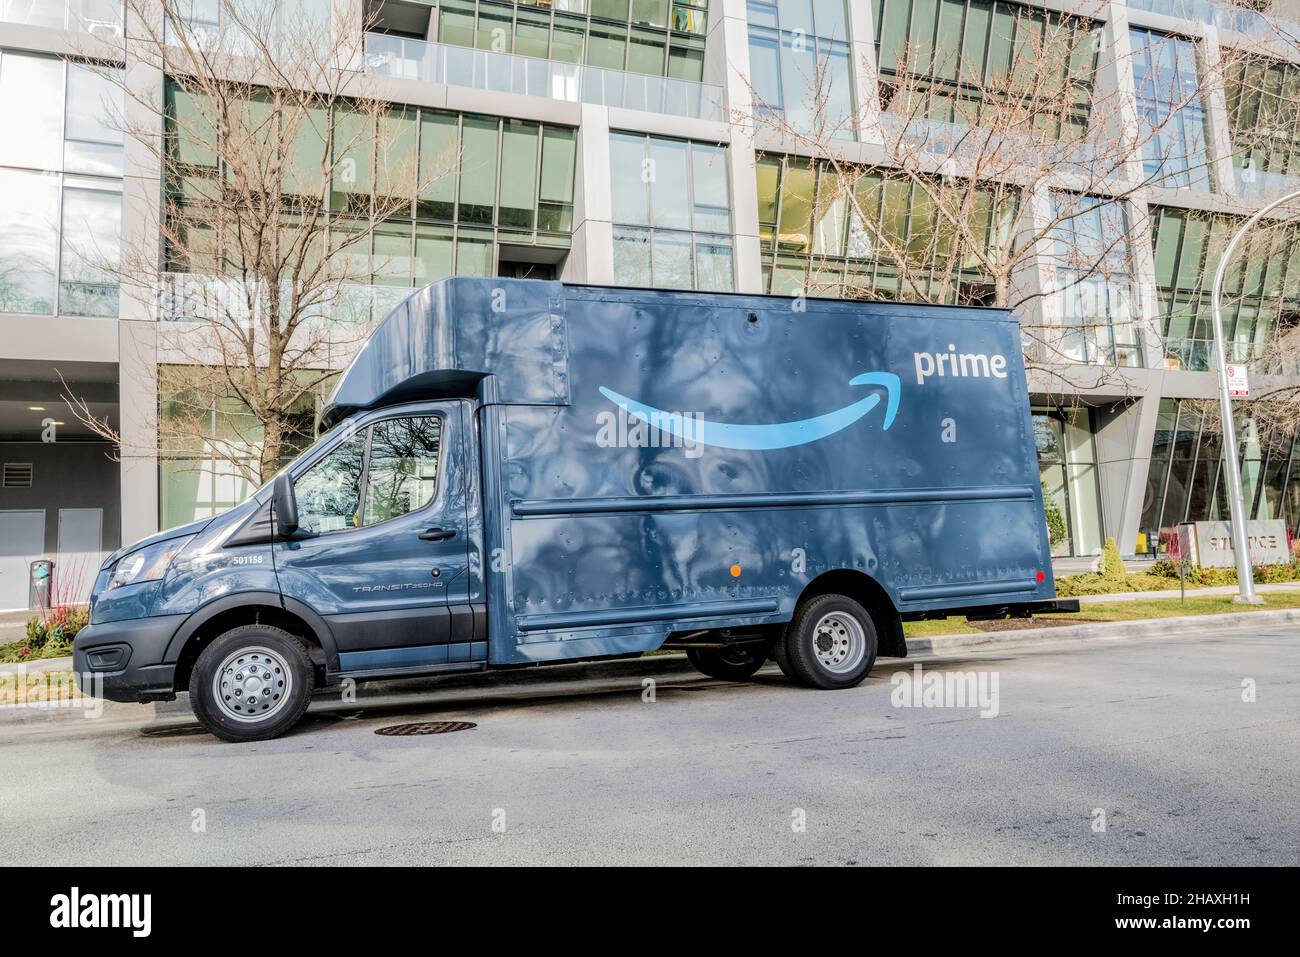 Blue Amazon box truck parked on a Chicago street making deliveries in front of an apartment building. Stock Photo